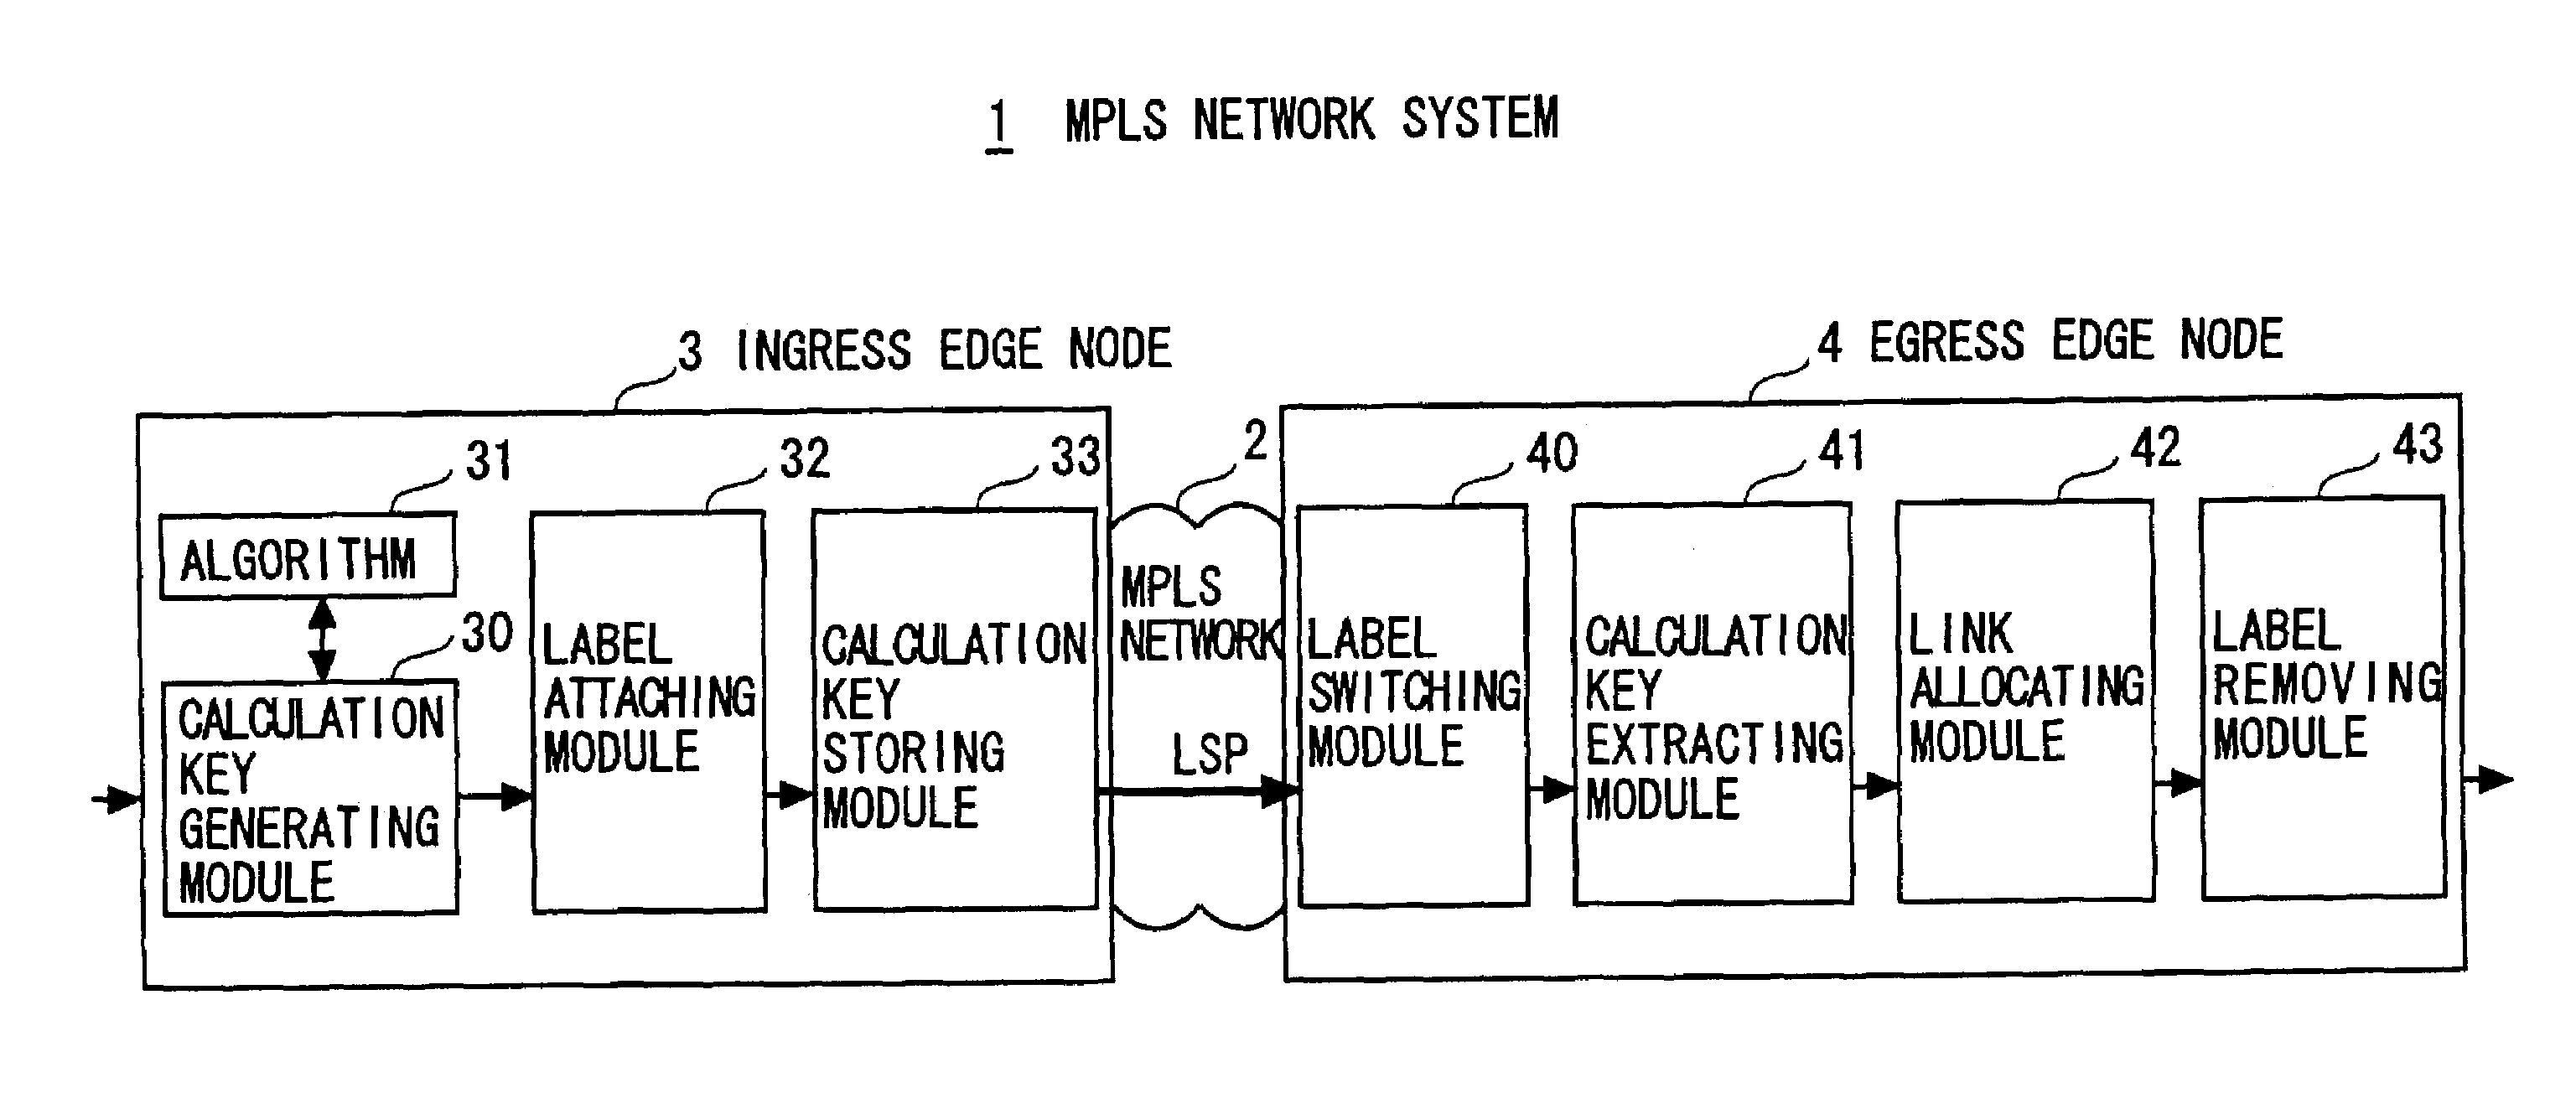 MPLS network system